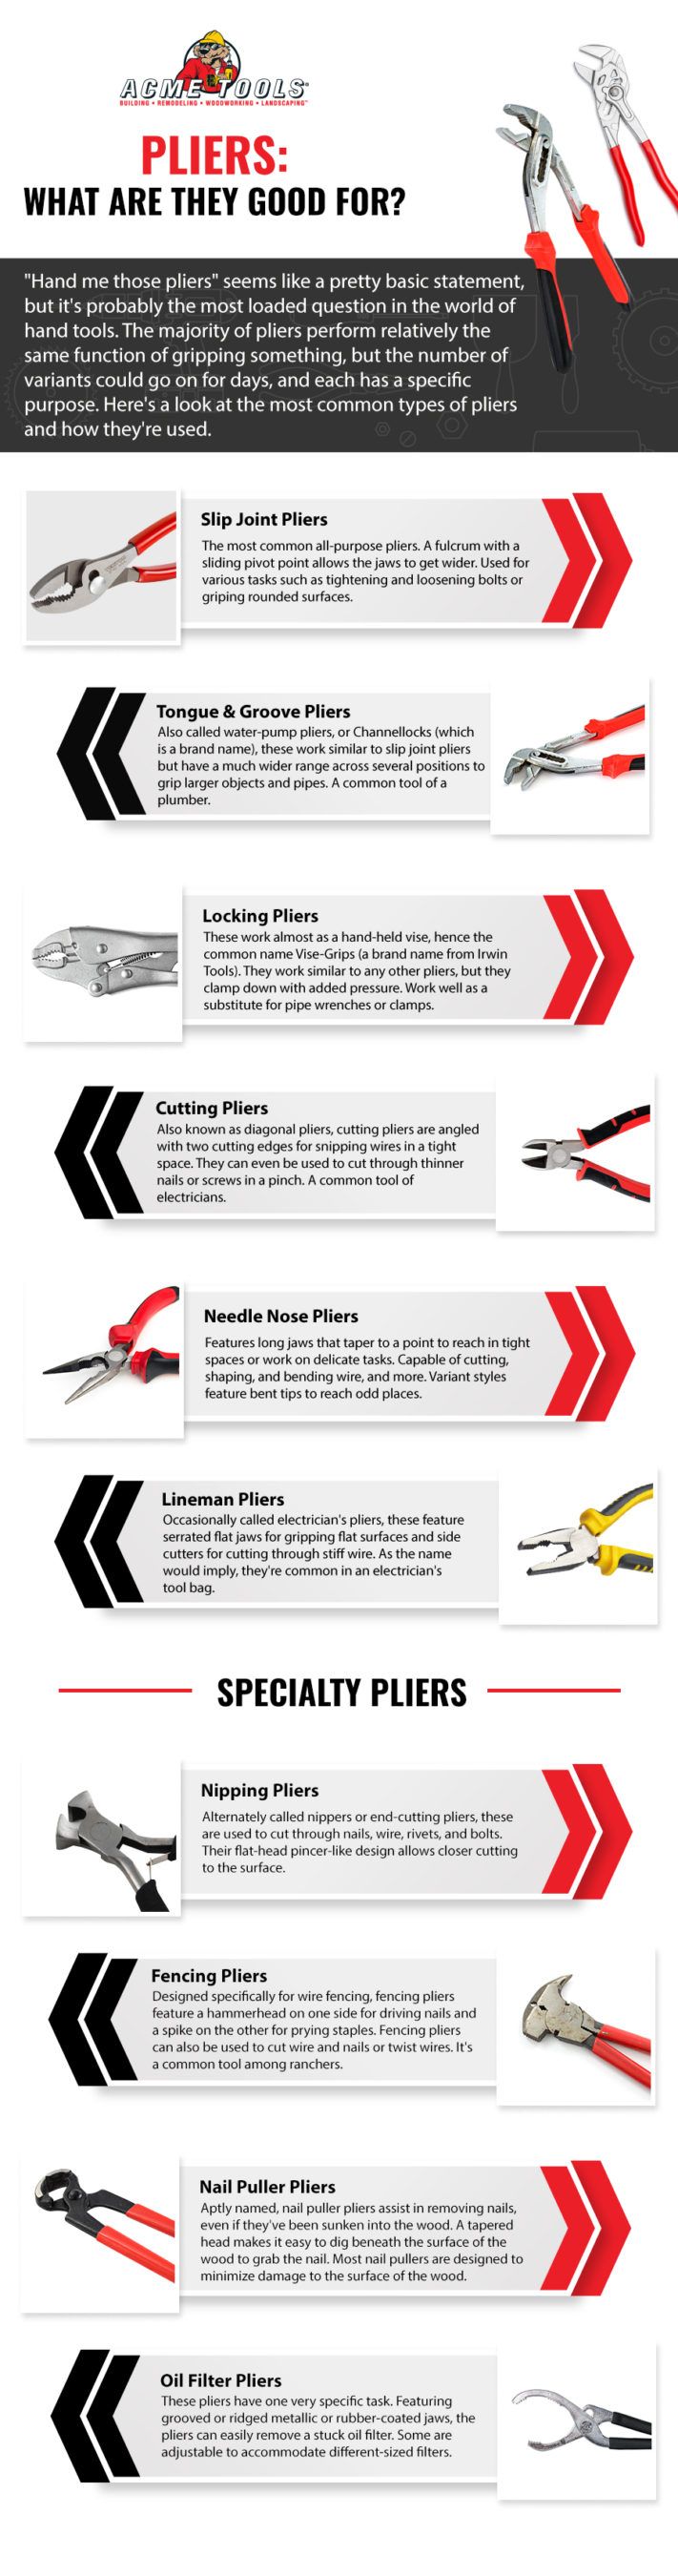 List of the most common pliers and what they are used for.